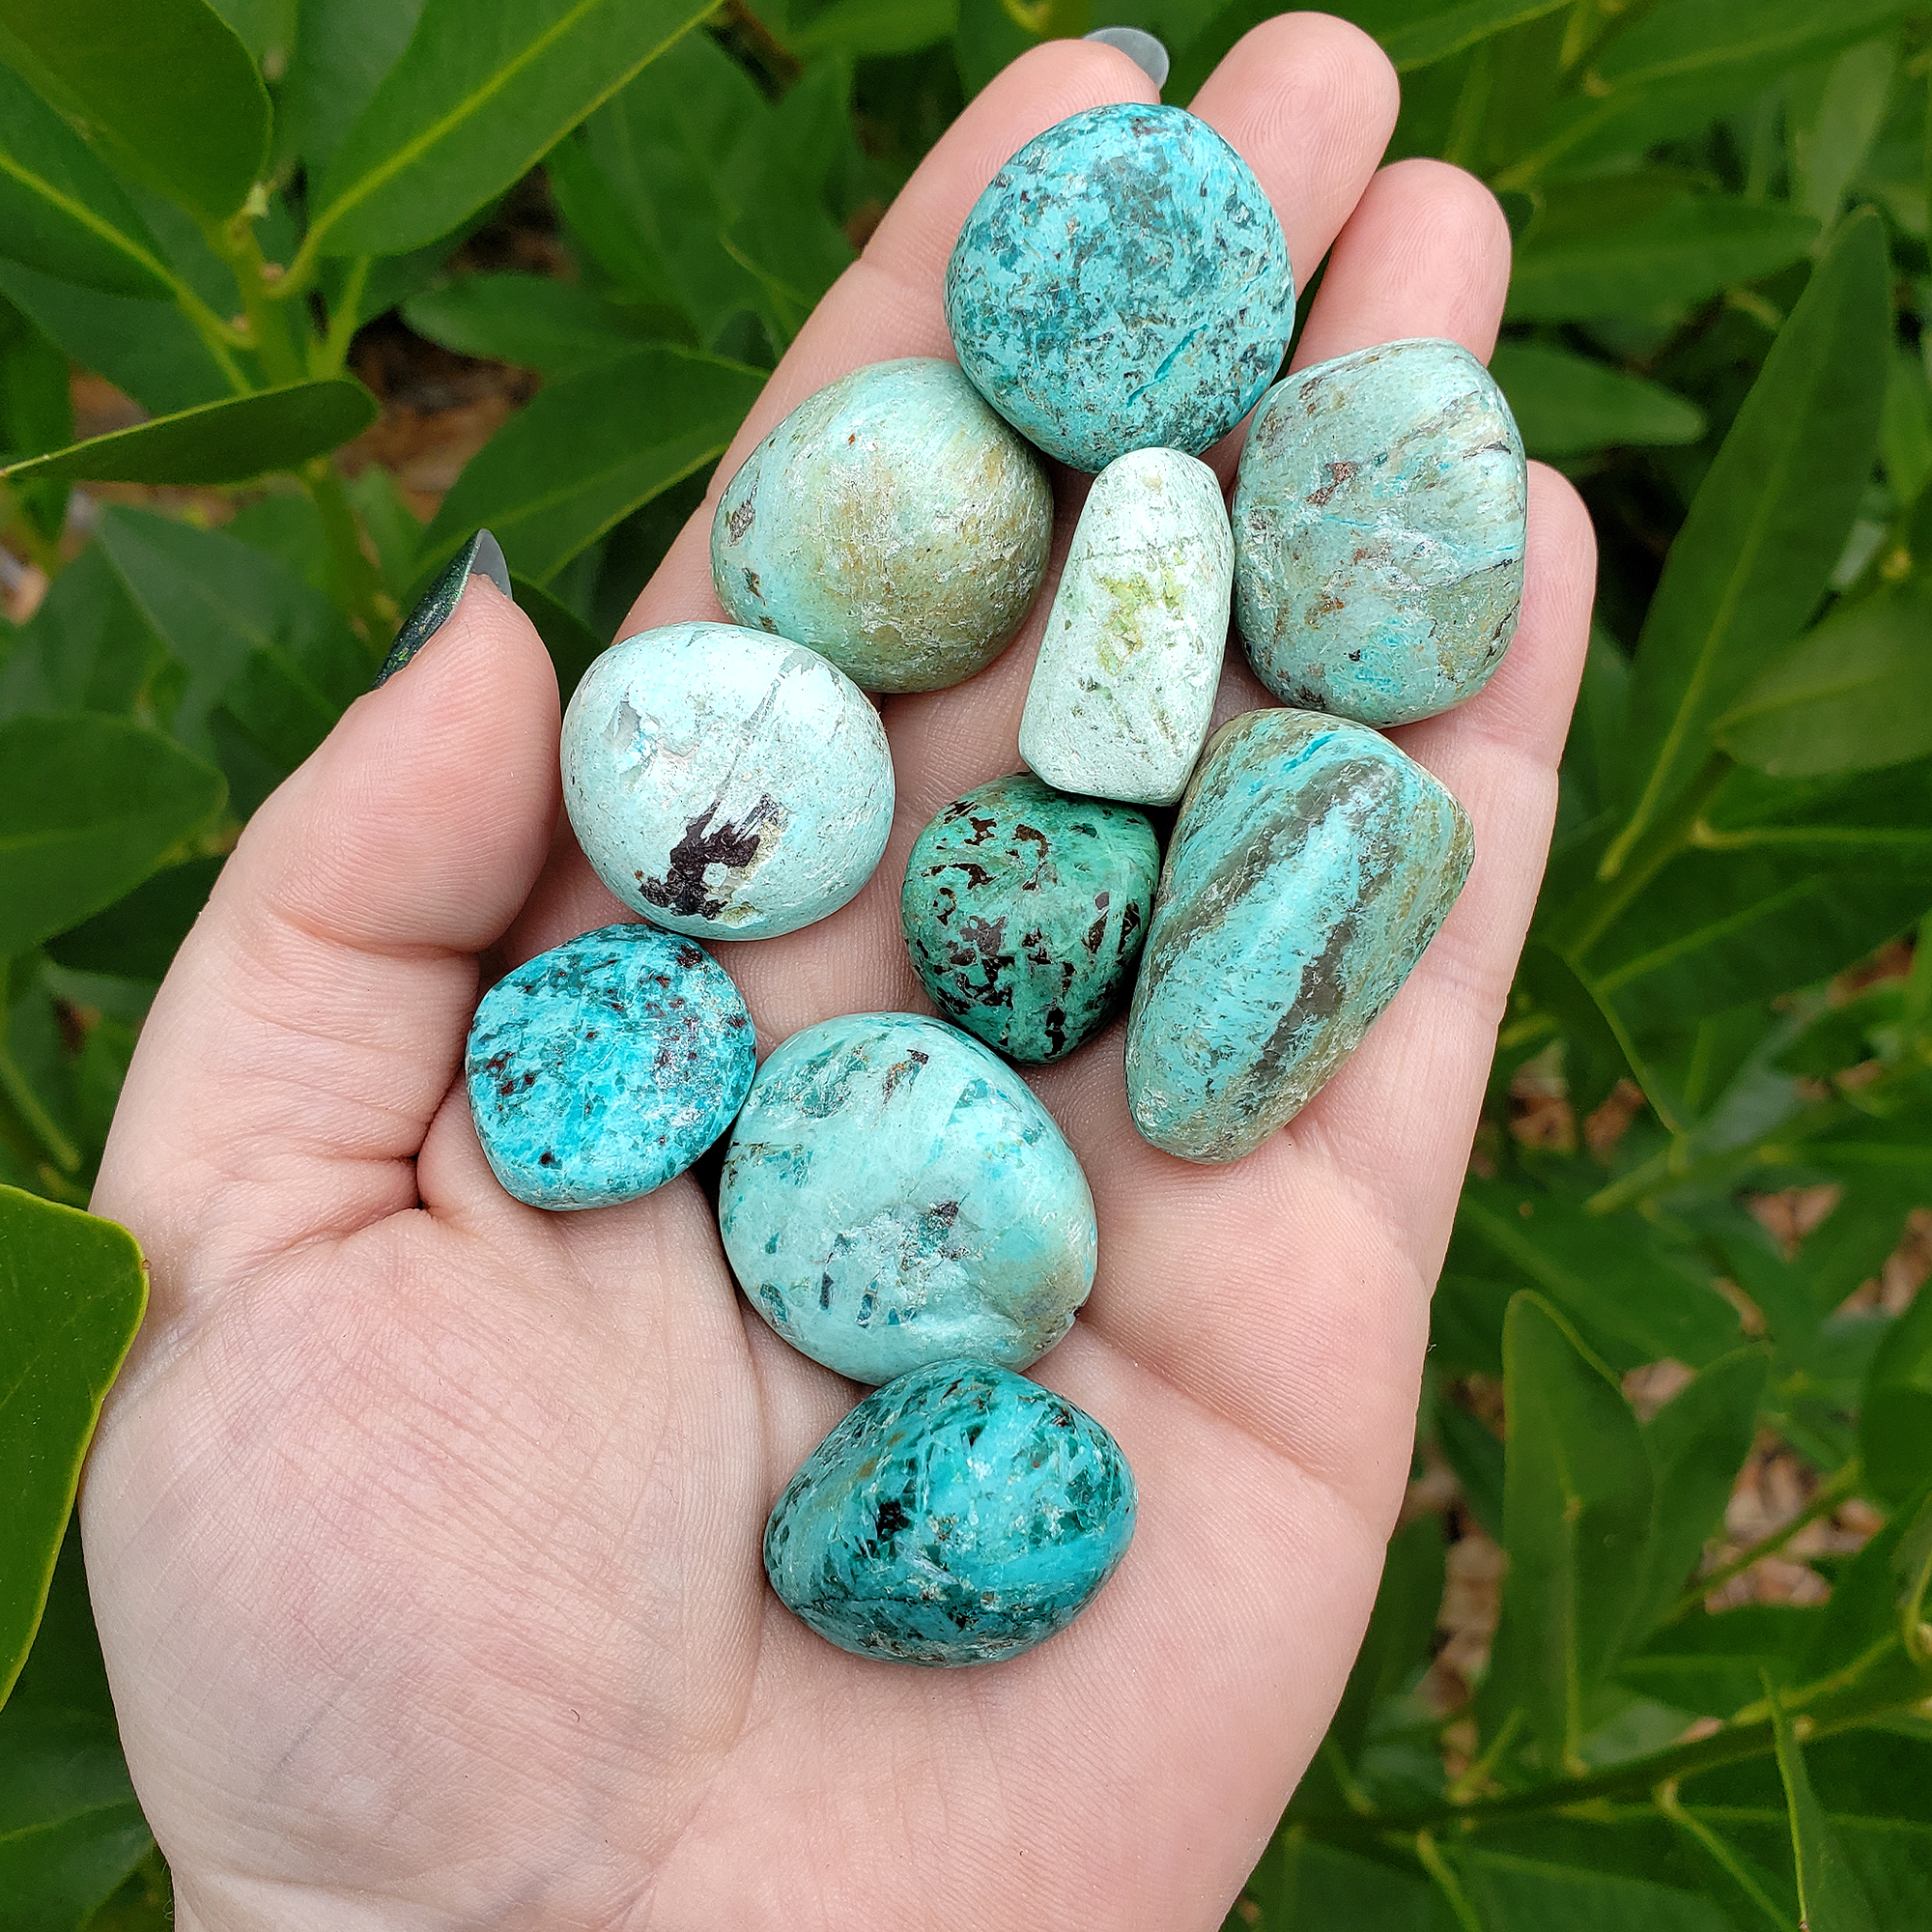 Peruvian Turquoise Natural Tumbled Stone - One Stone - In Hand